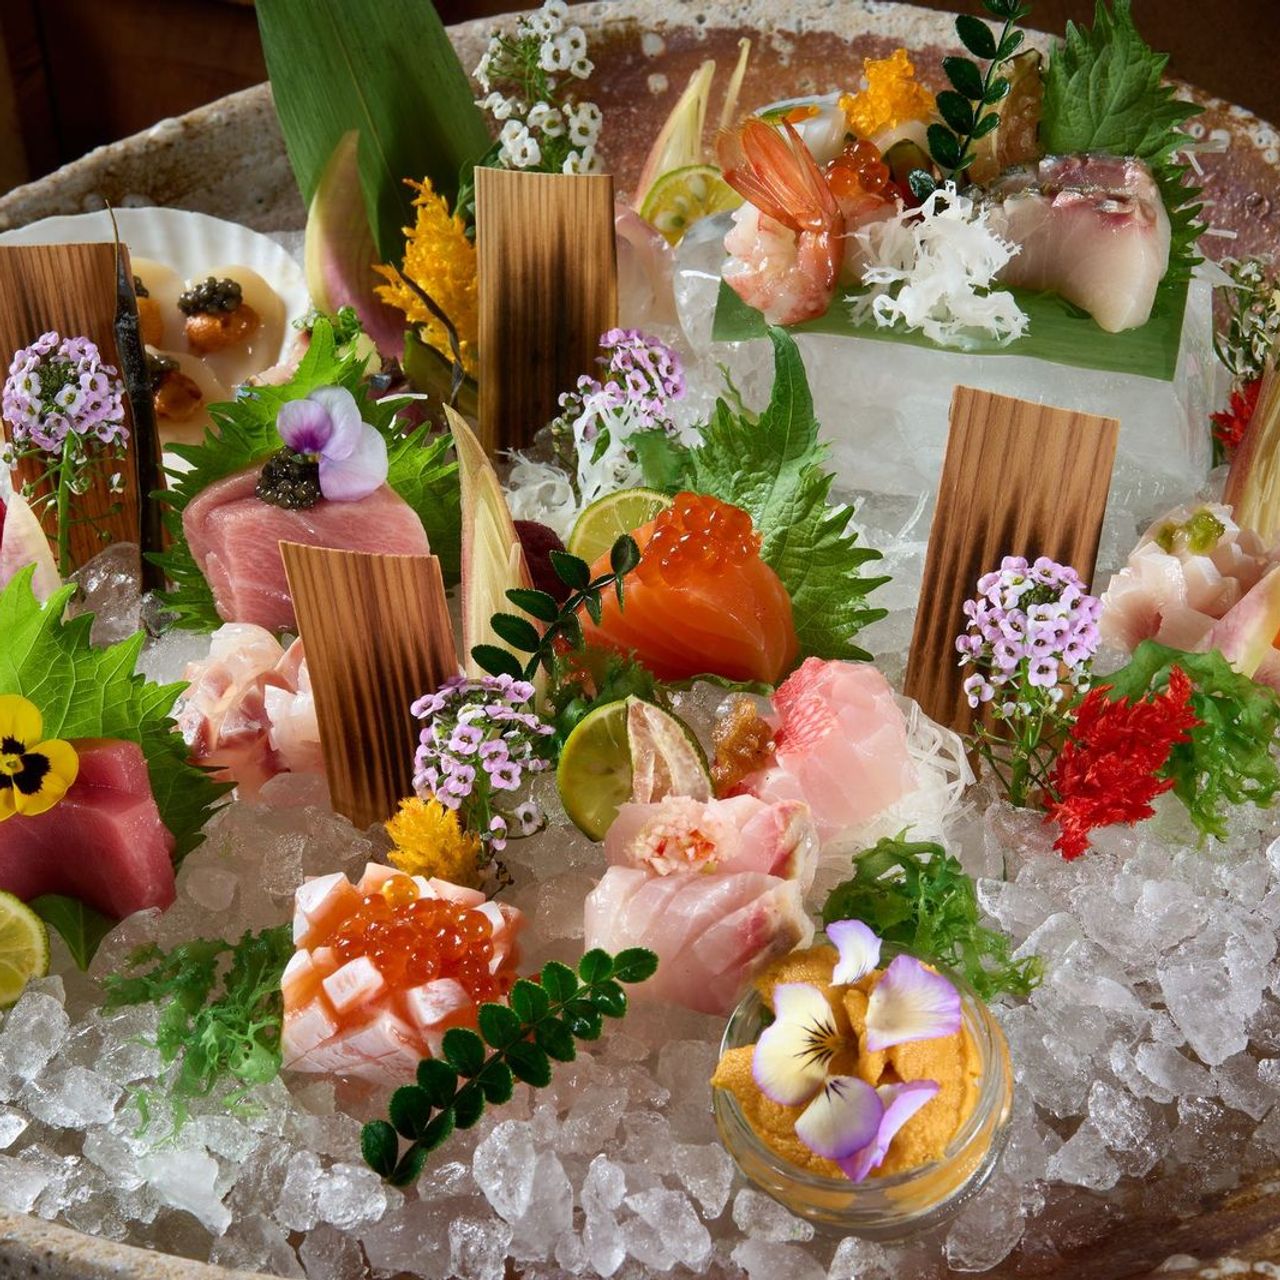 ZUMA Miami – Modern Japanese Cuisine that offers much more than